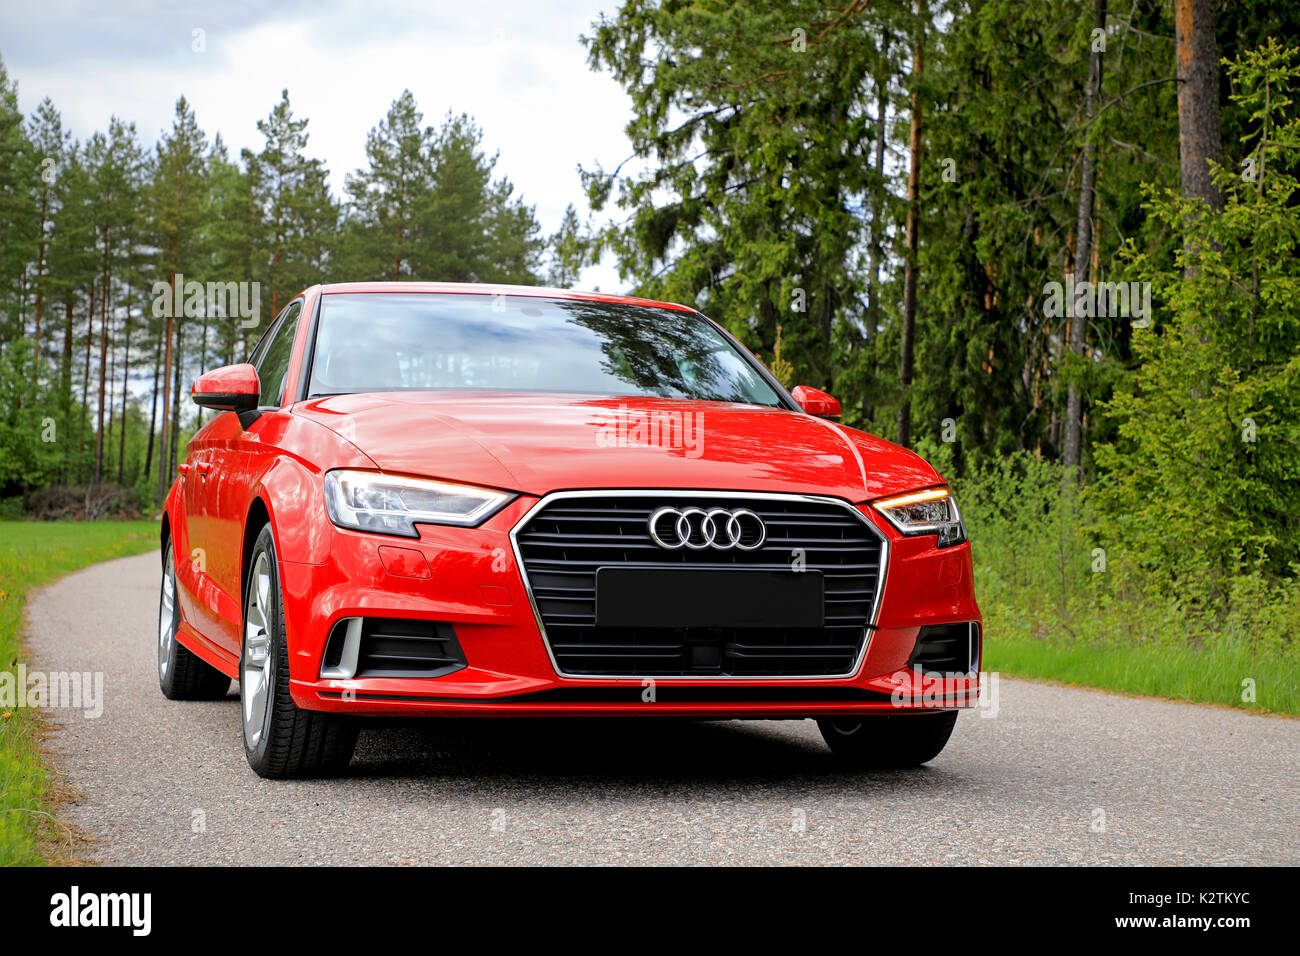 SALO, FINLAND - JUNE 2, 2017: New beautiful Tango red Audi A3 Sedan Business Sport 2017 parked on a small rural road flanked by forest in early summer Stock Photo